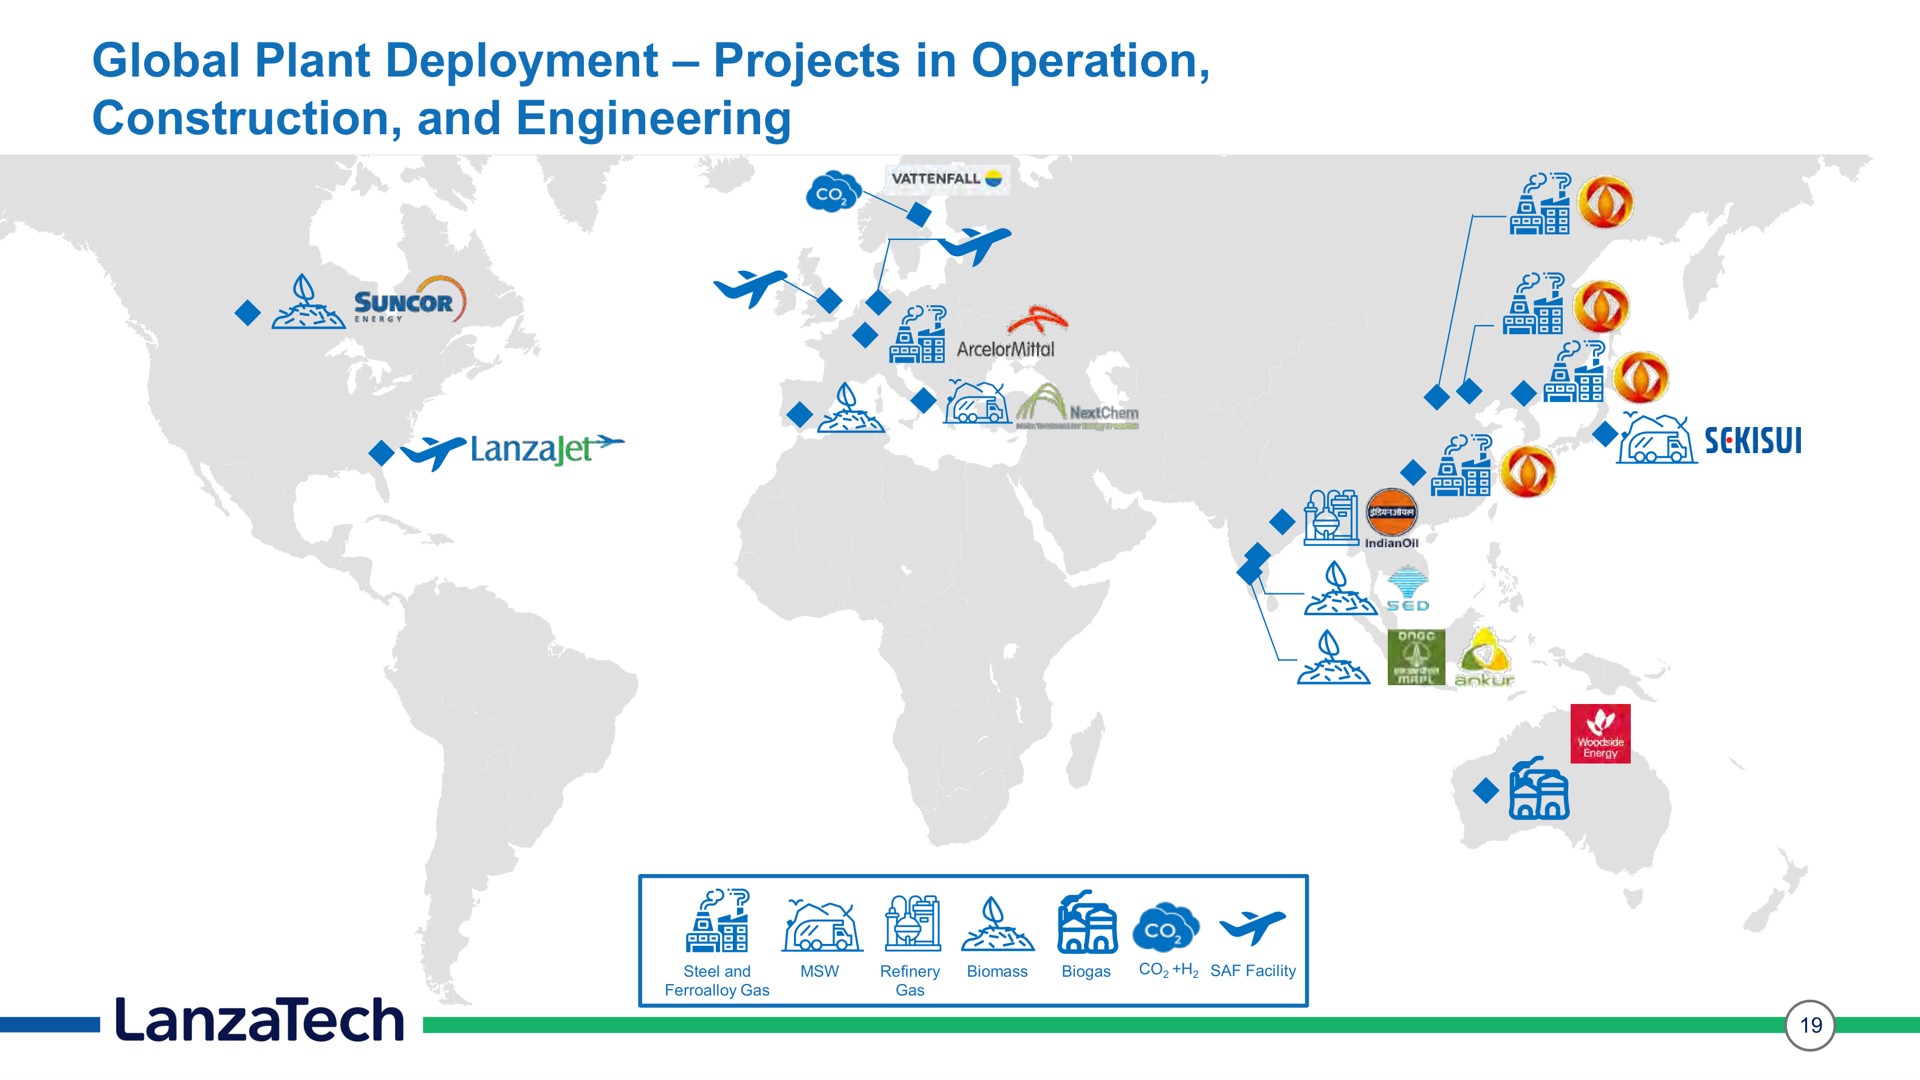 global plant deployment projects in operation construction and engineering ore a i mele ail ween | LanzaTech